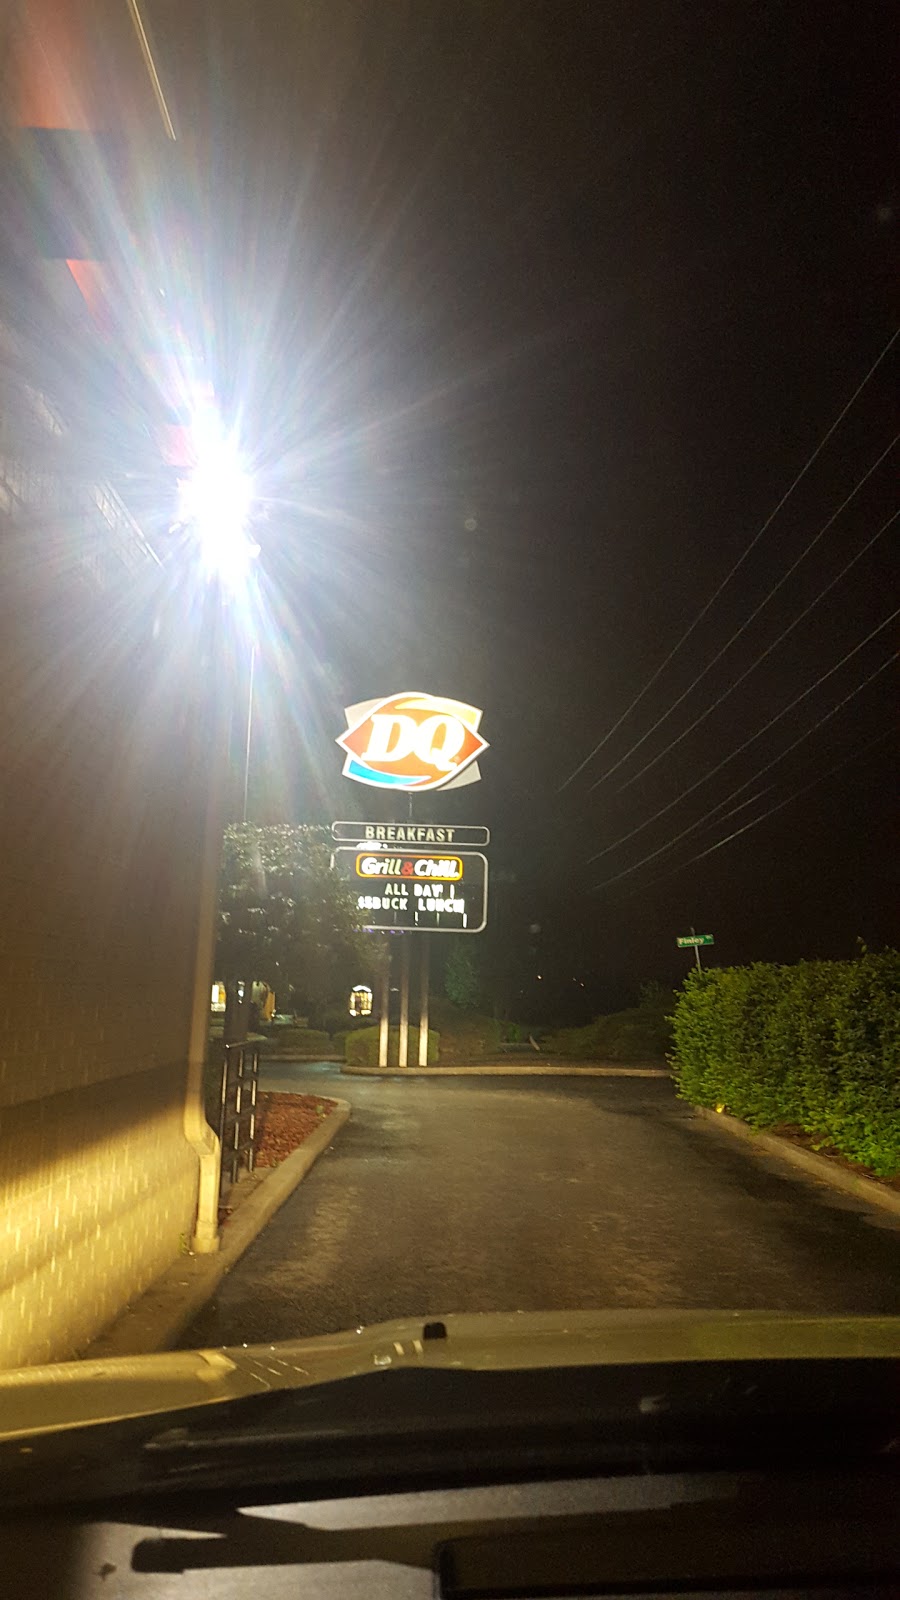 Dairy Queen Grill & Chill | 101 Finley Dr, Georgetown, KY 40324 | Phone: (502) 868-9444